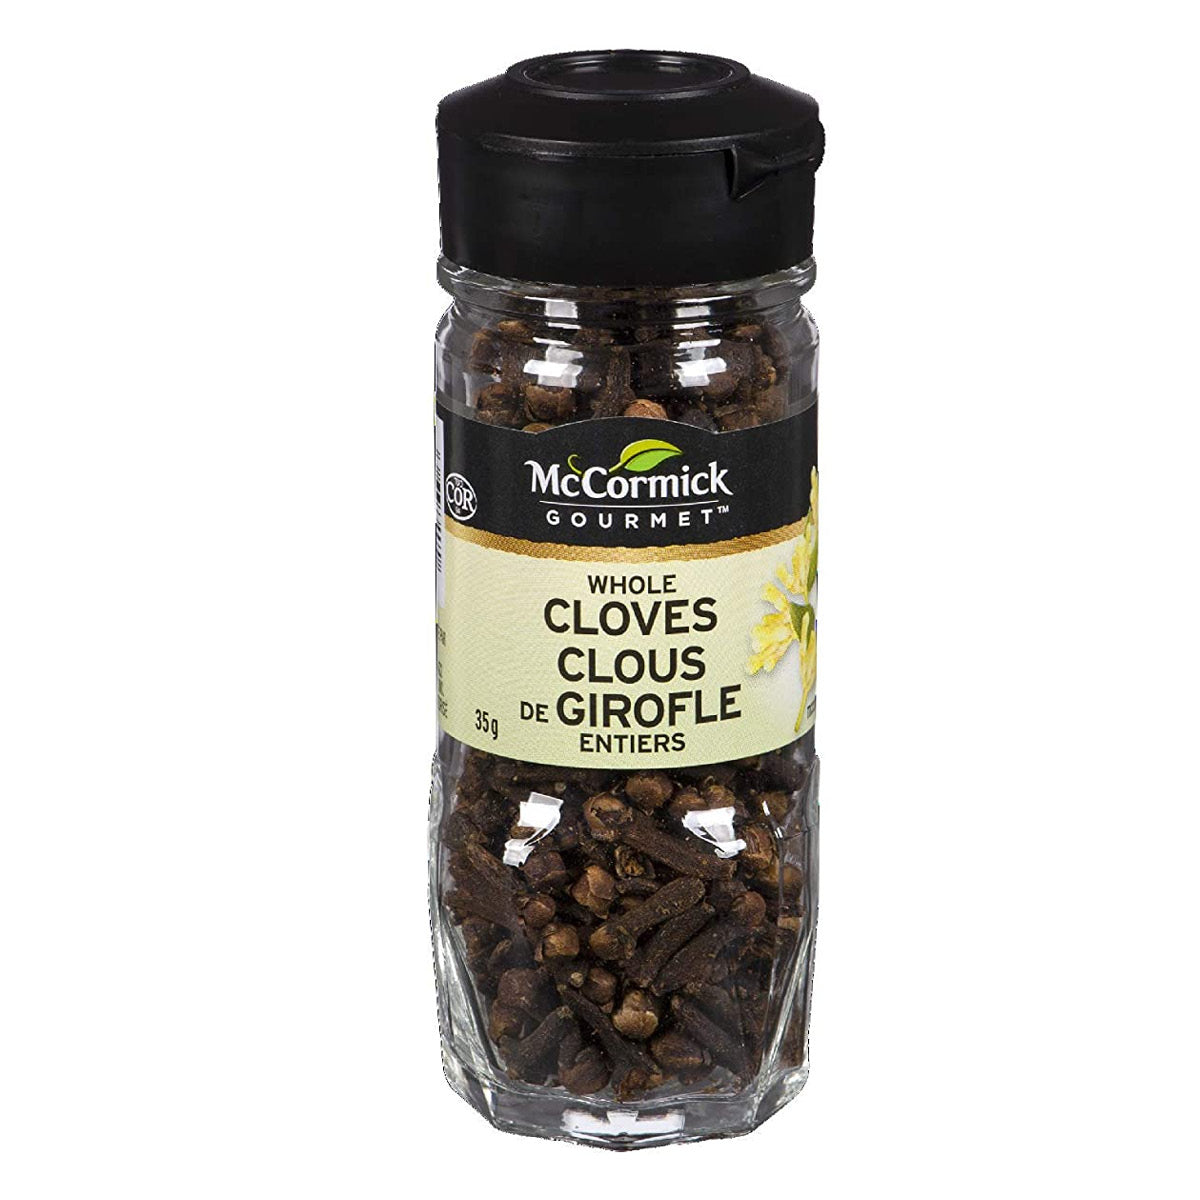 McCormick - Whole Cloves - 35g